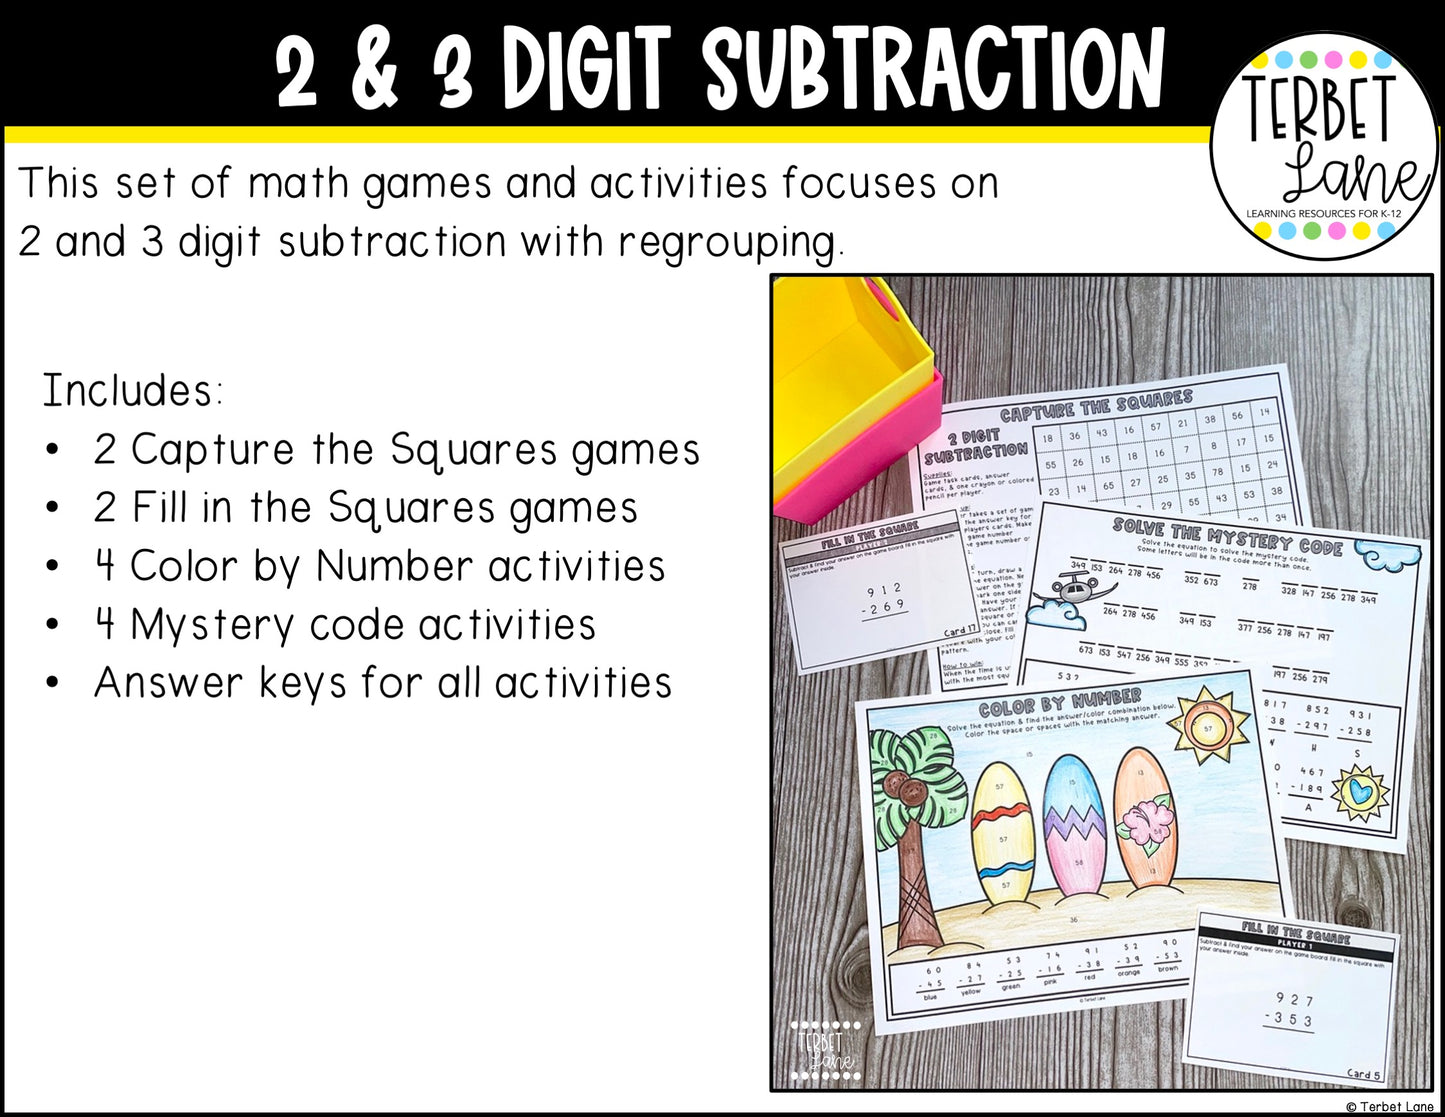 2 and 3 Digit Subtraction with Regrouping Games Math Activities